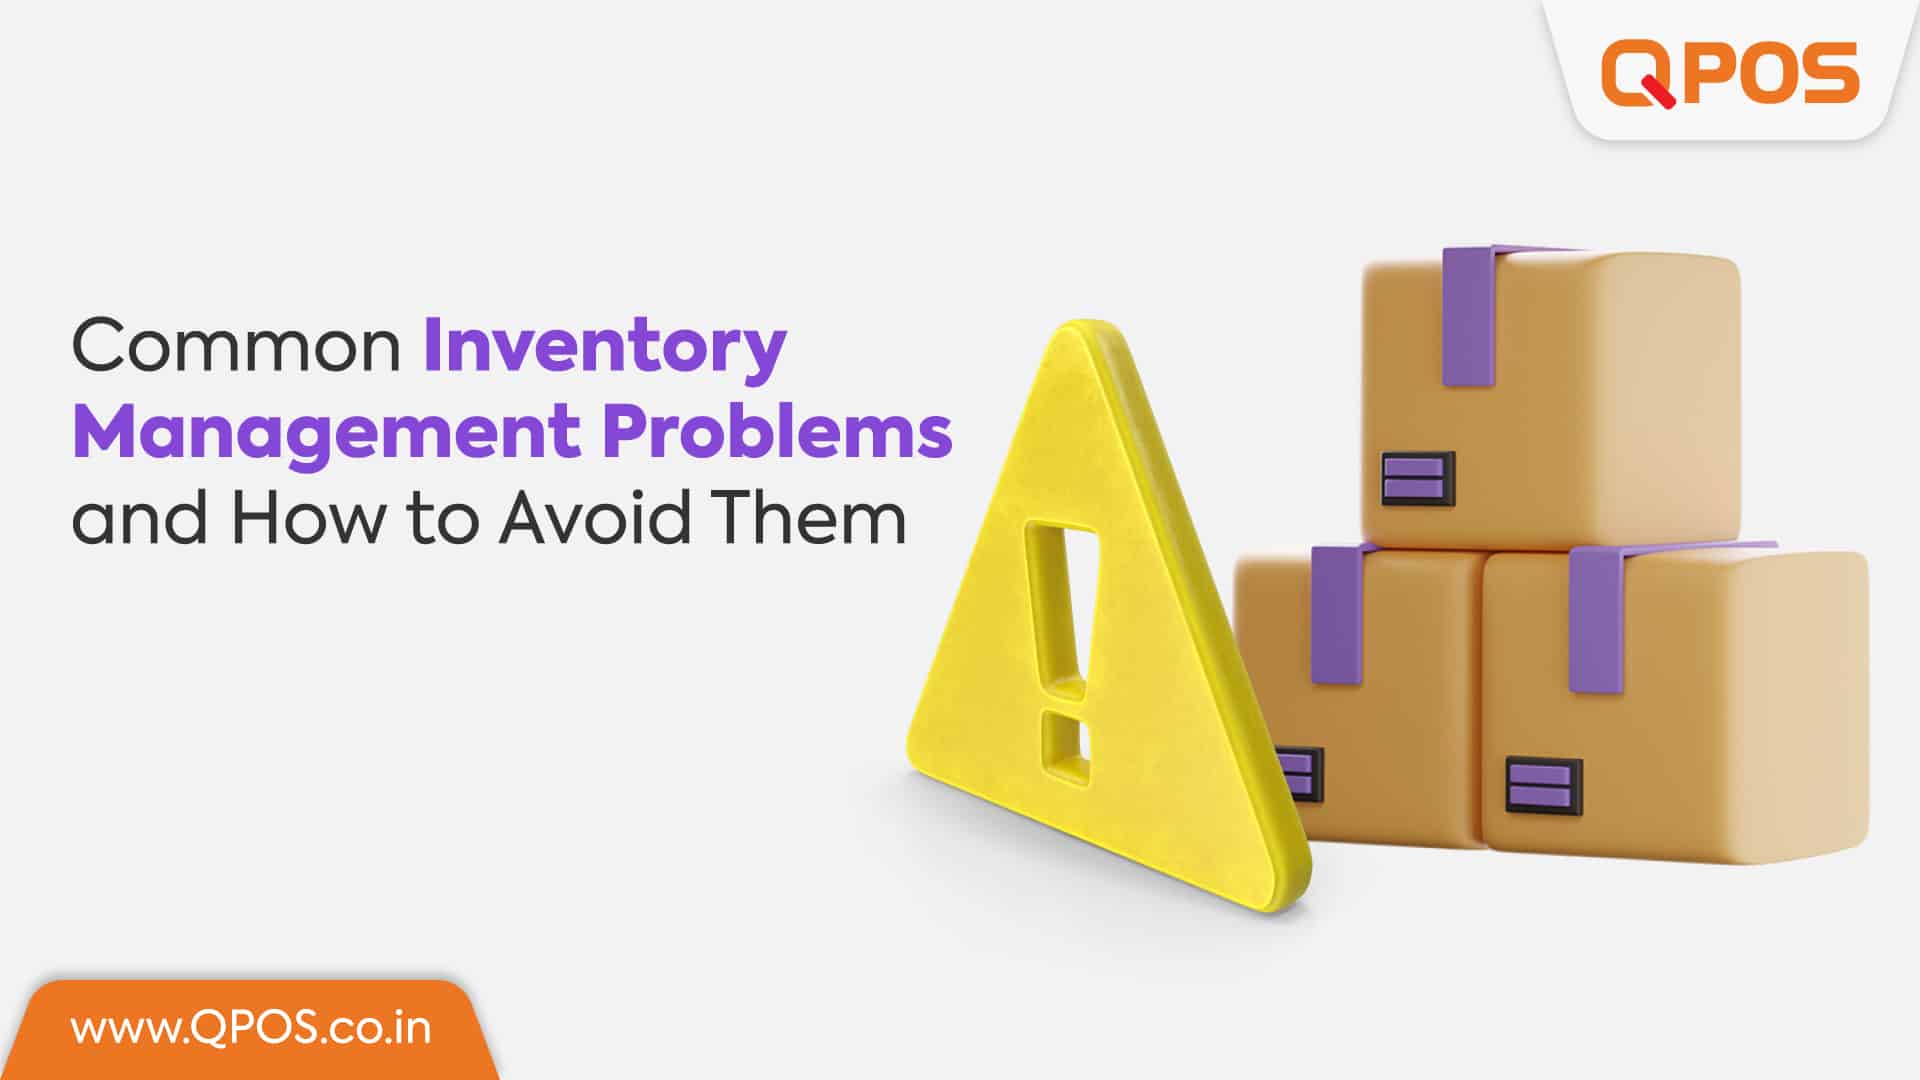 Common Inventory Management Problems and How to Avoid Them